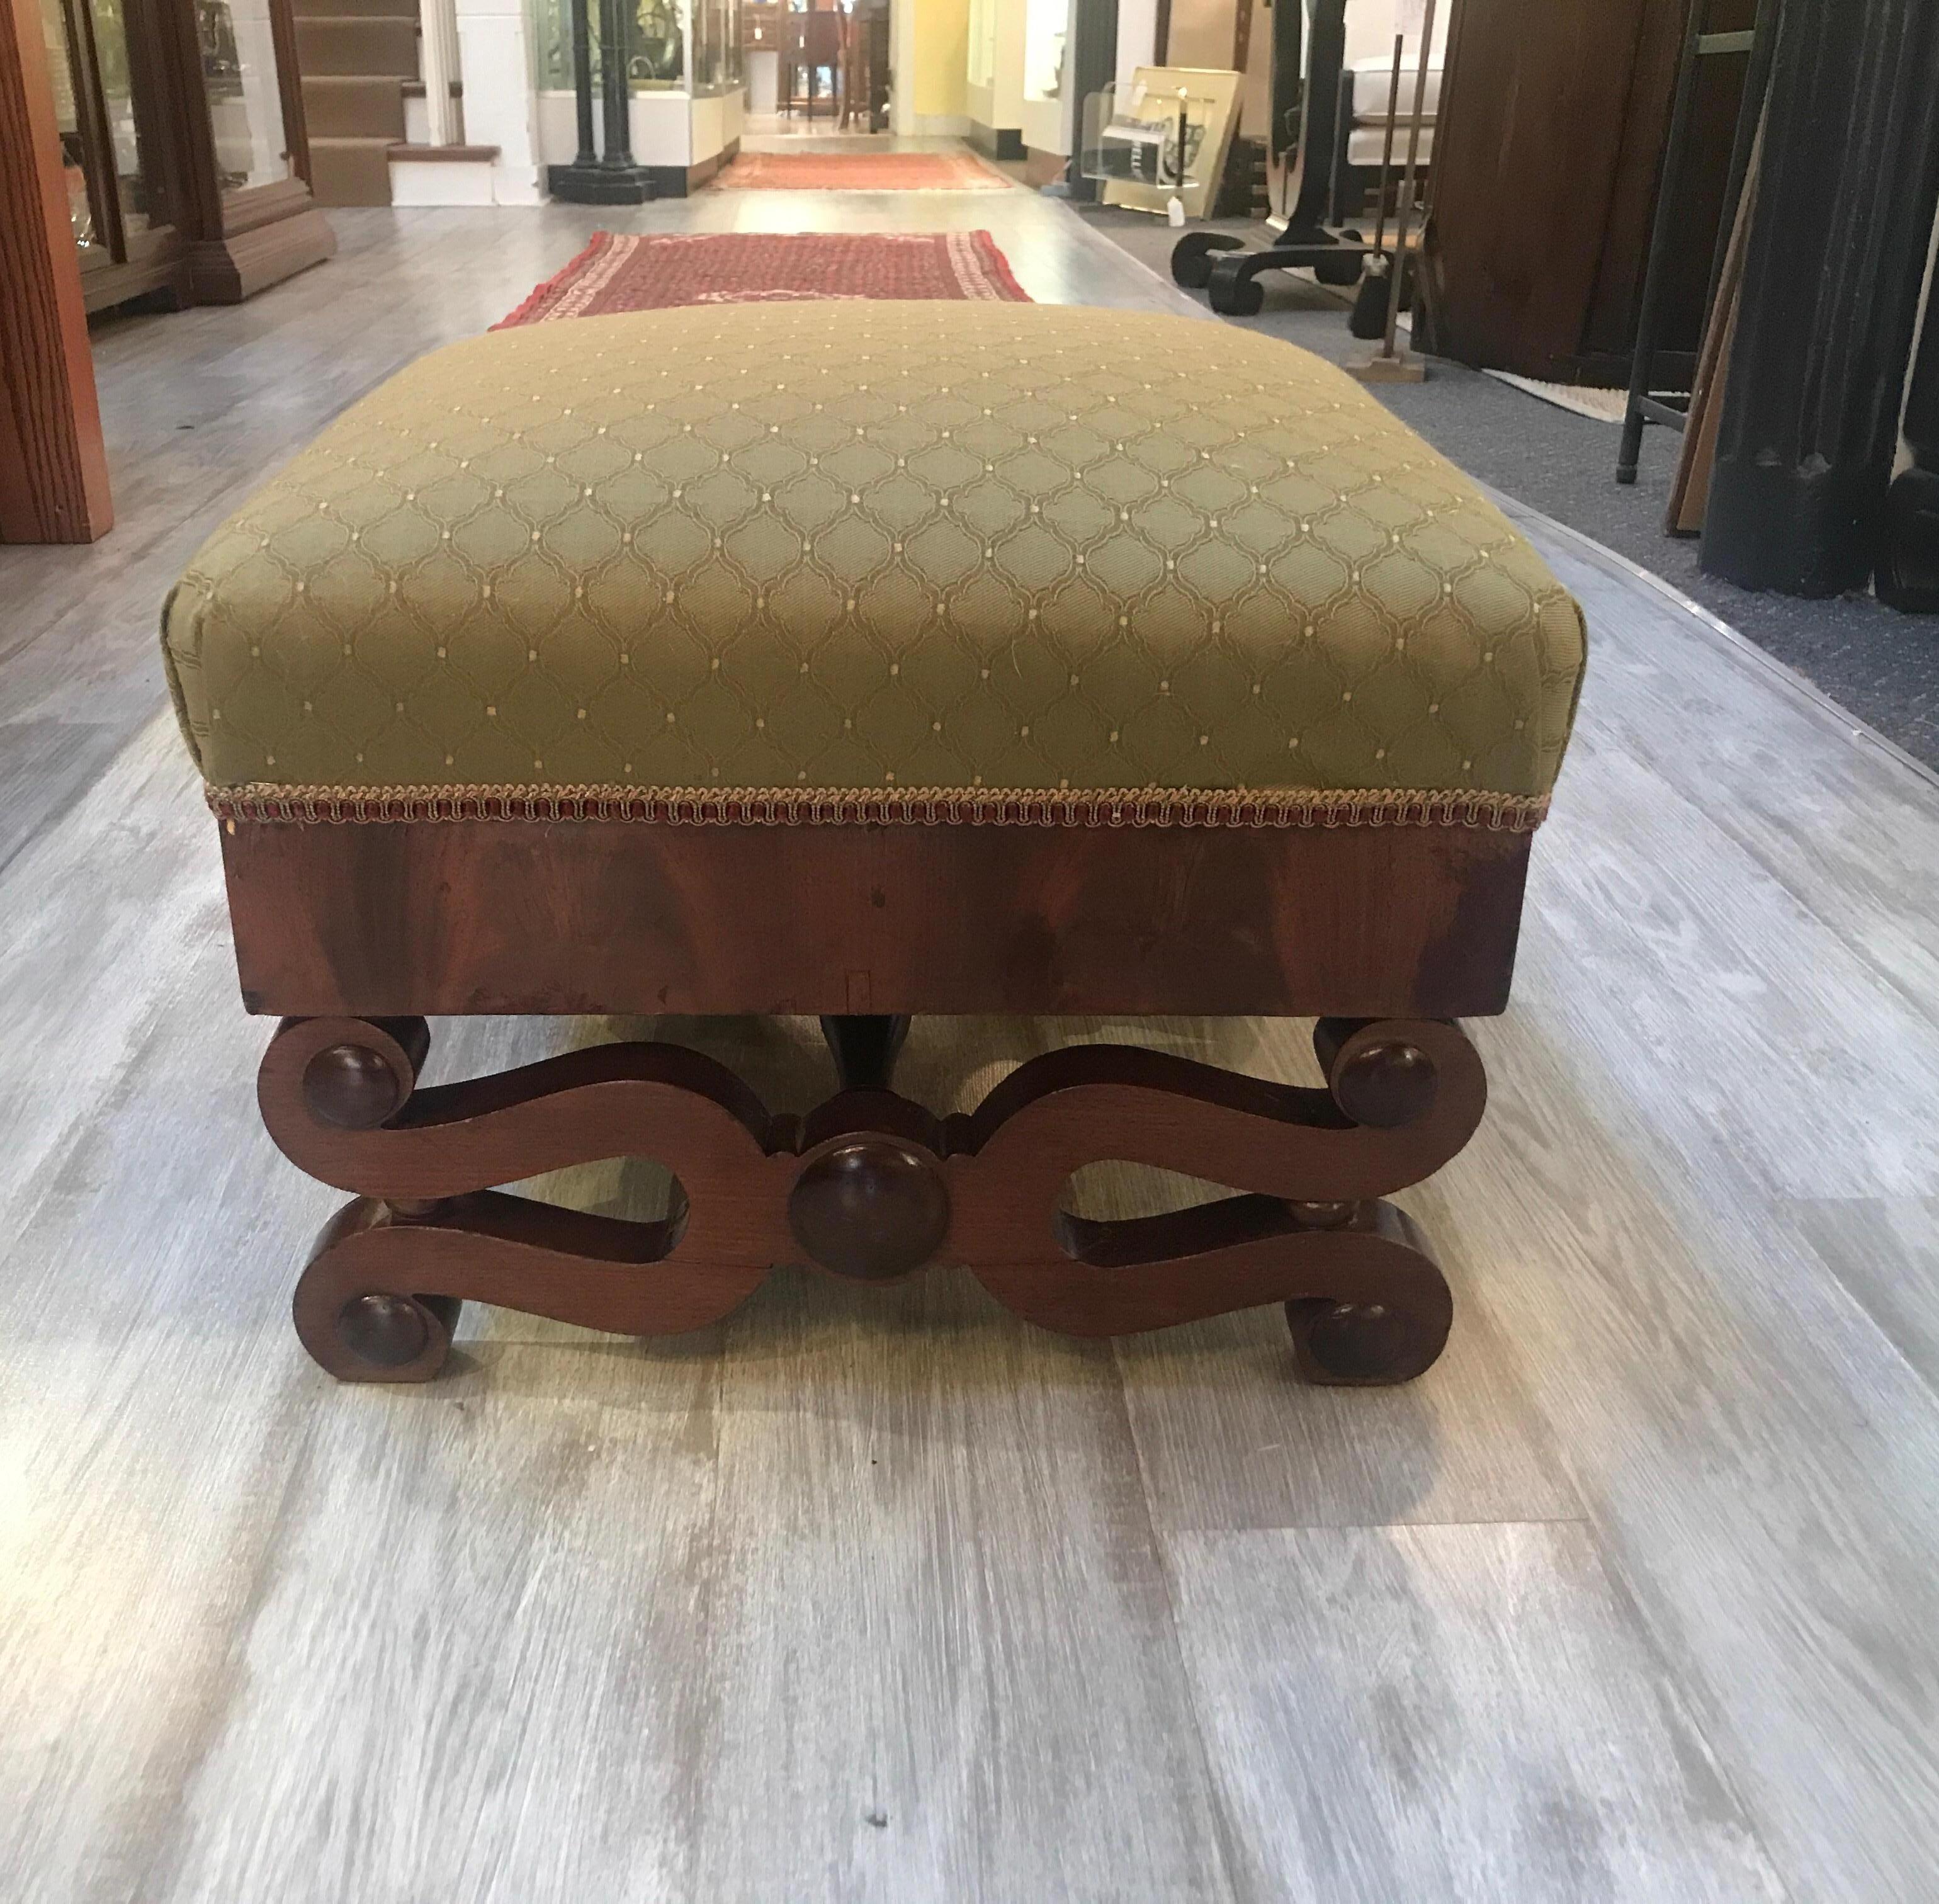 Handsome American Empire mahogany bench with new upholstery. The flame mahogany wood frame with elegant shaped base and new upholstery.